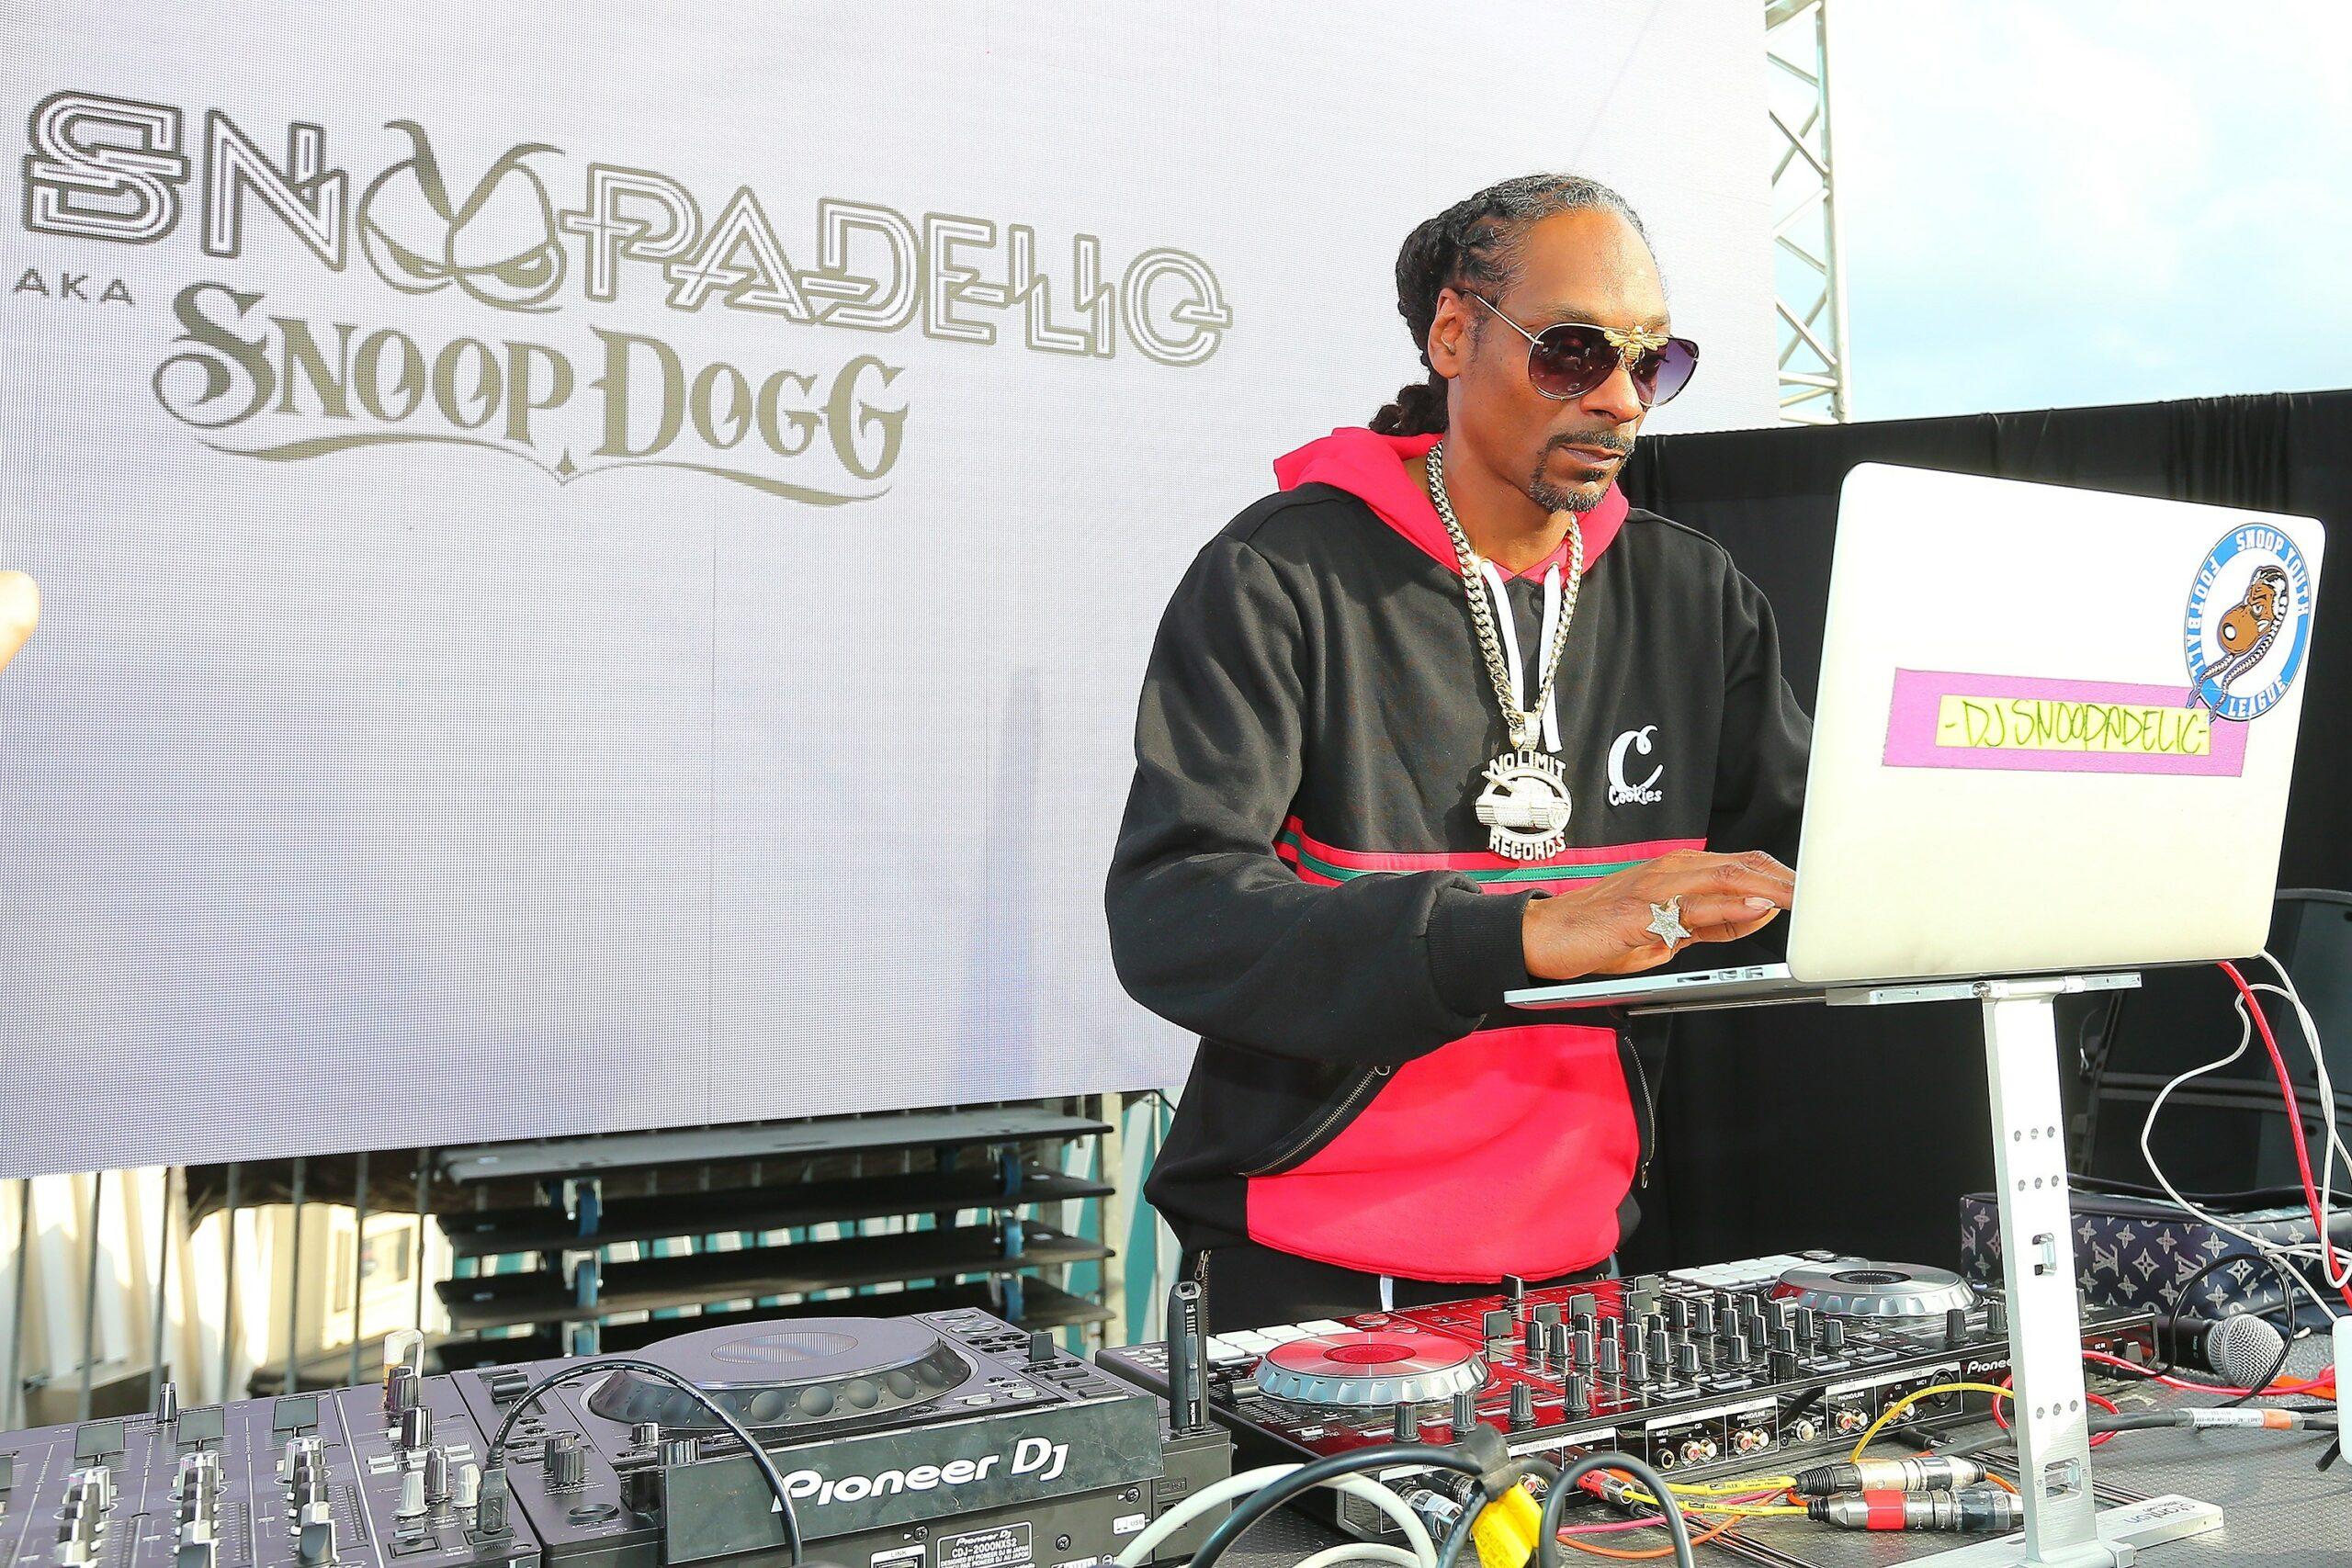 Snoop Dogg performs at Tampa Bay Daylife party poolside at the Seminole Hard Rock Hotel amp Casino Tampa FL